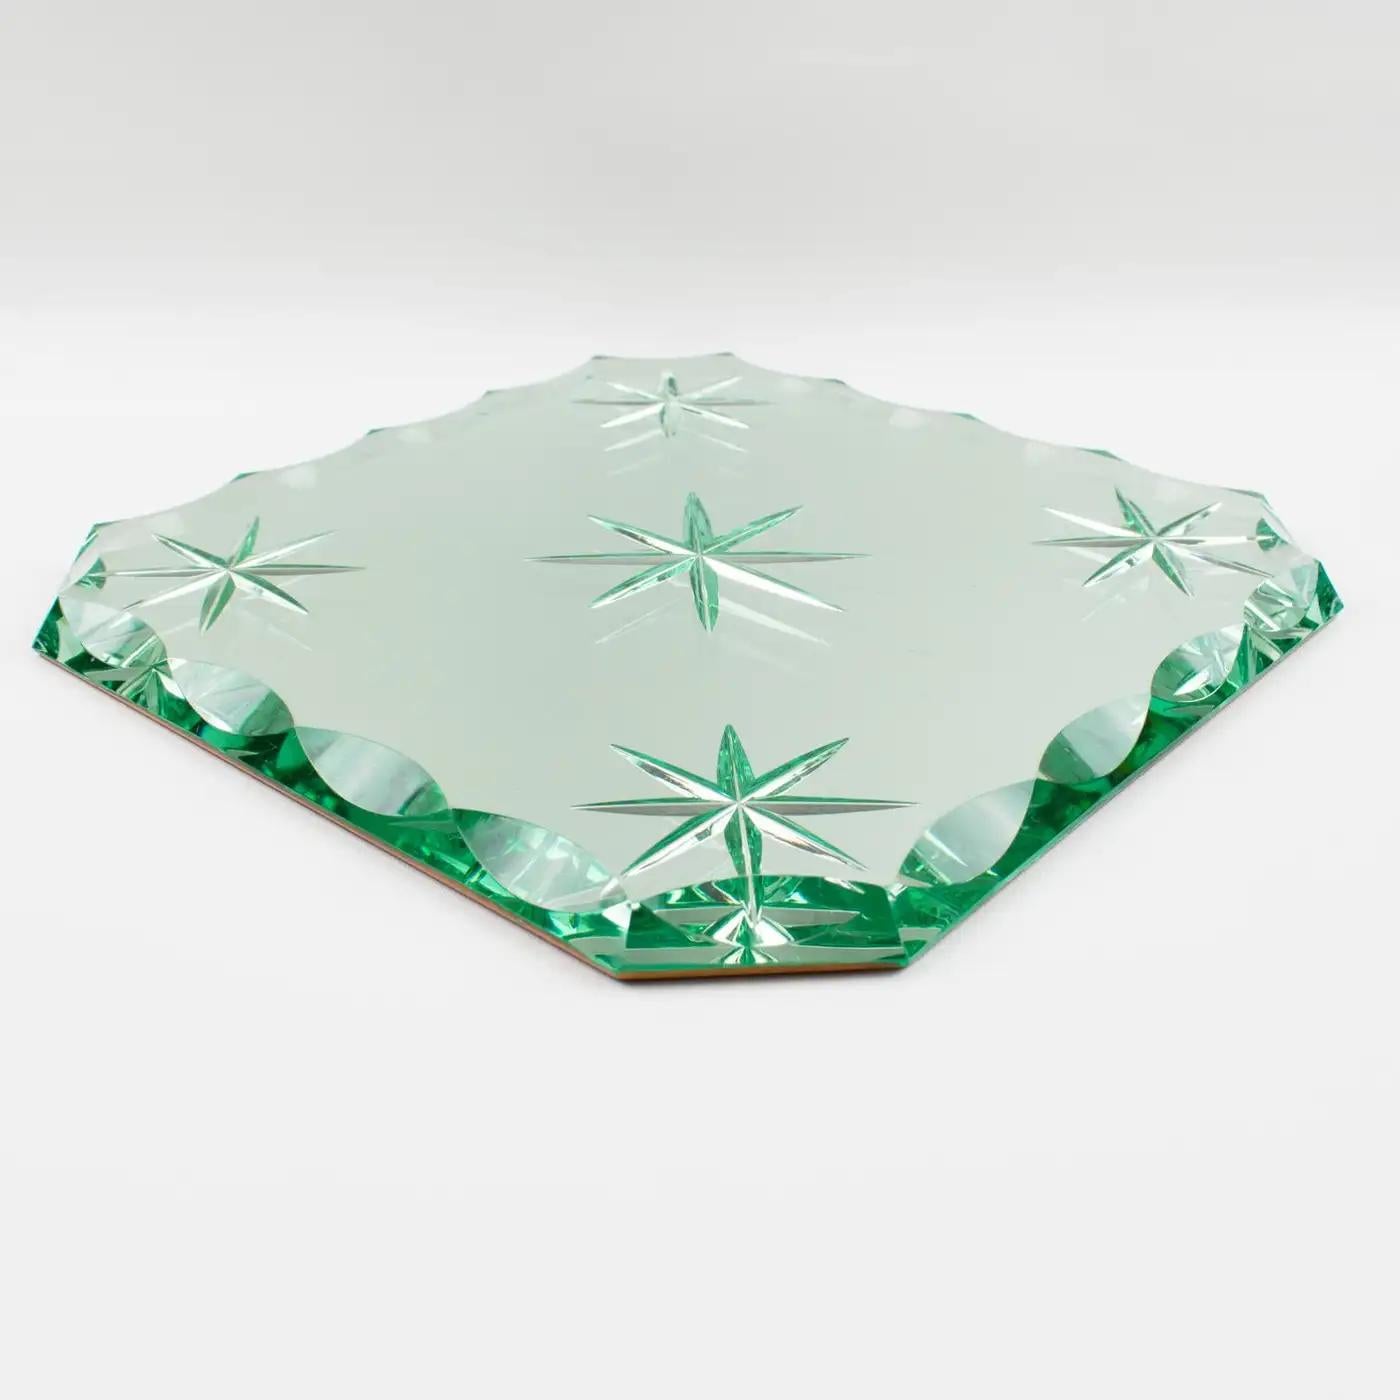 Mid-20th Century Jean Luce Art Deco Mirrored Glass Tray, Platter or Centerpiece, 1930s For Sale